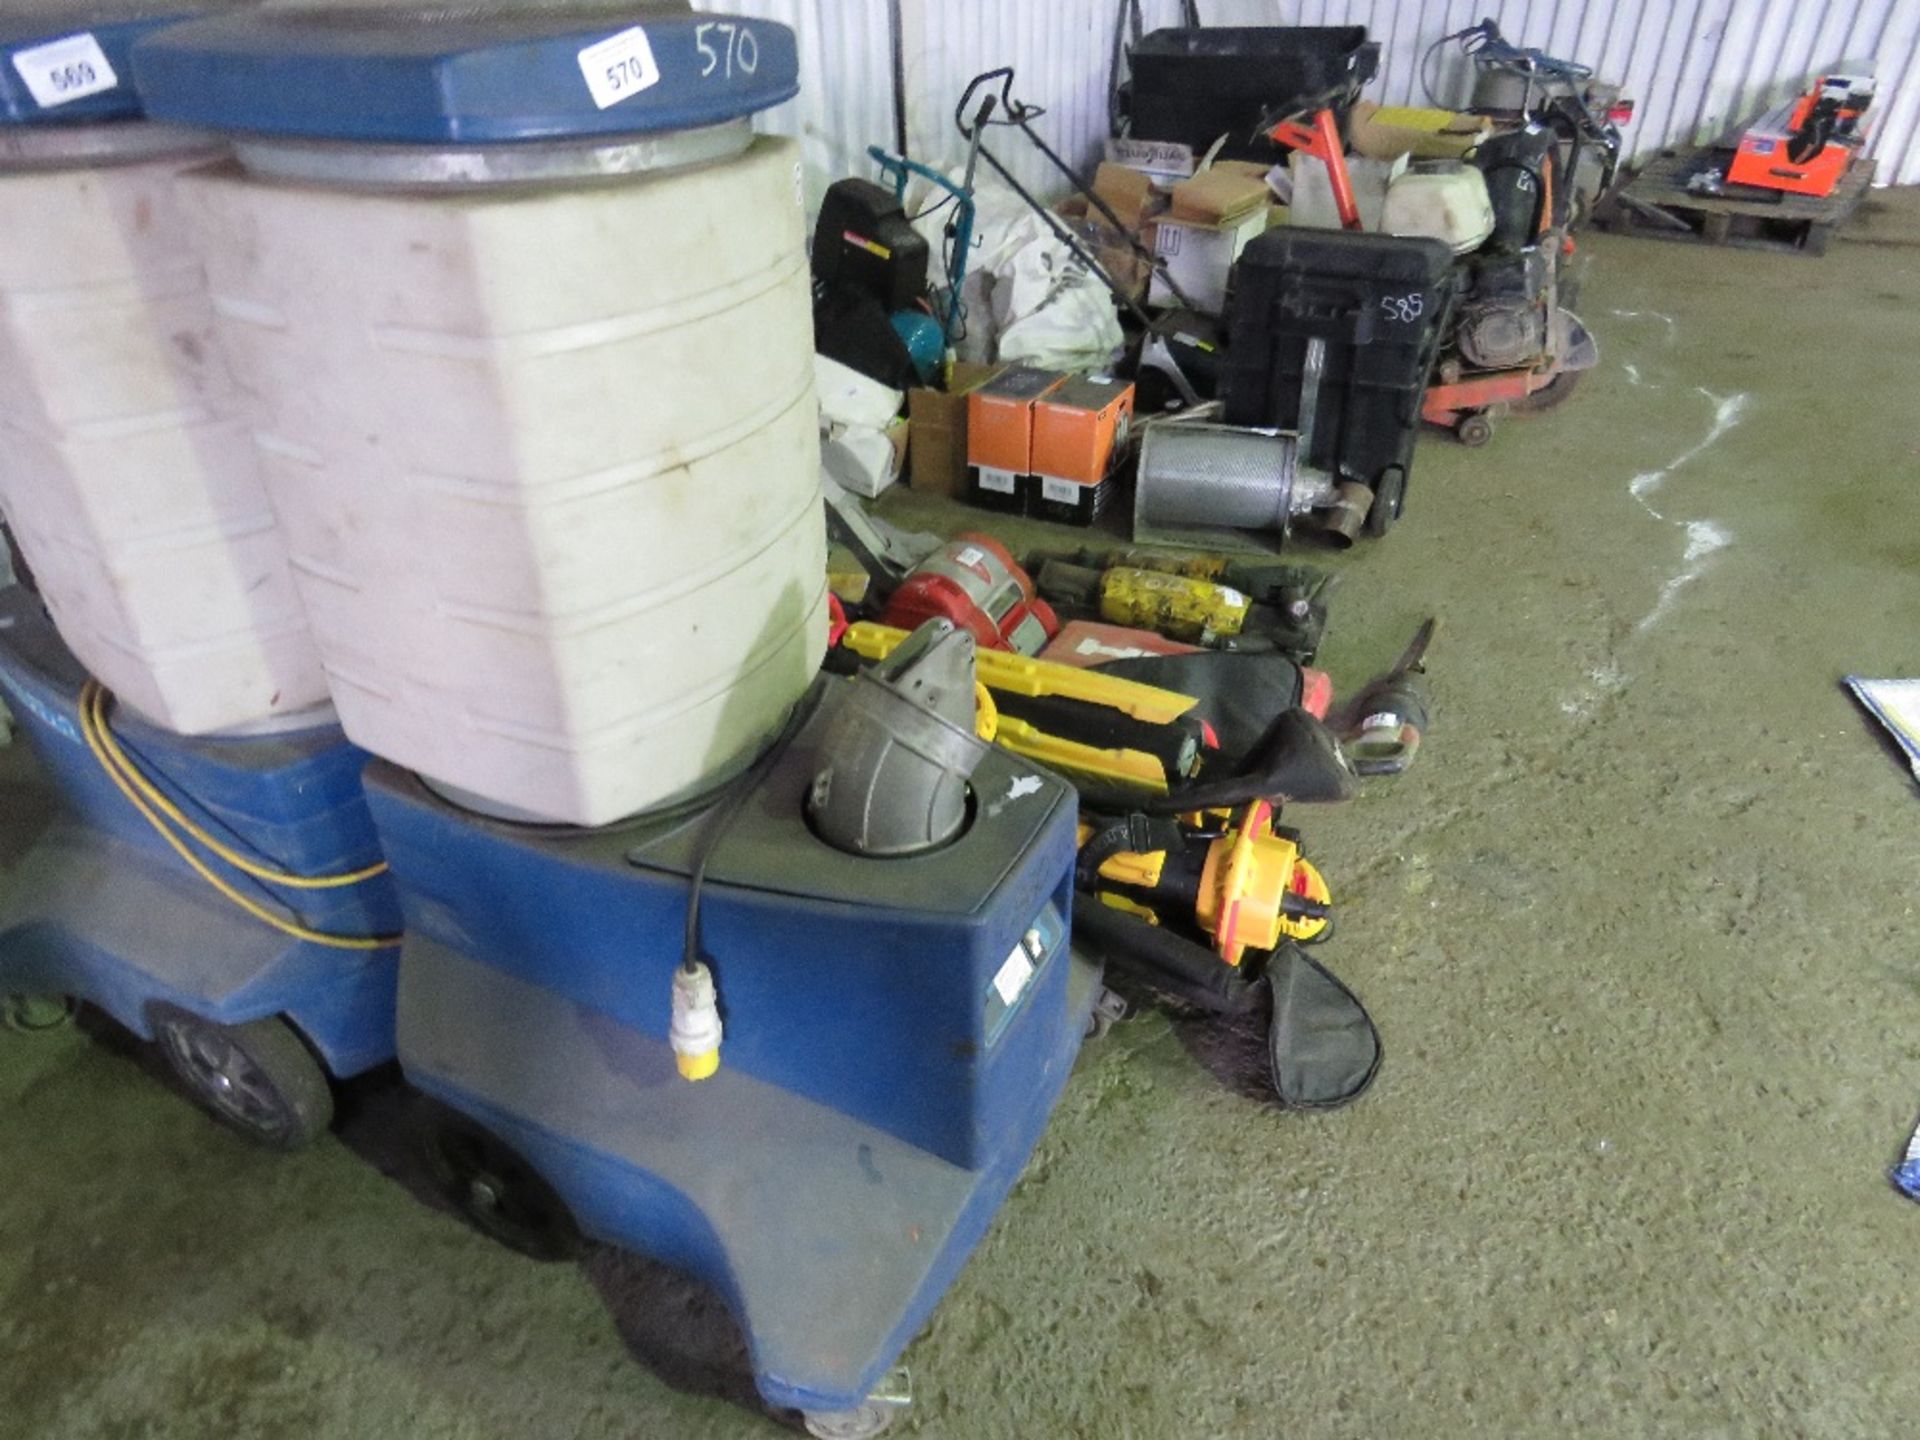 2 X WELDING FUME EXTRACTOR UNITS. UNTESTED, CONDITION UNKNOWN. - Image 5 of 6